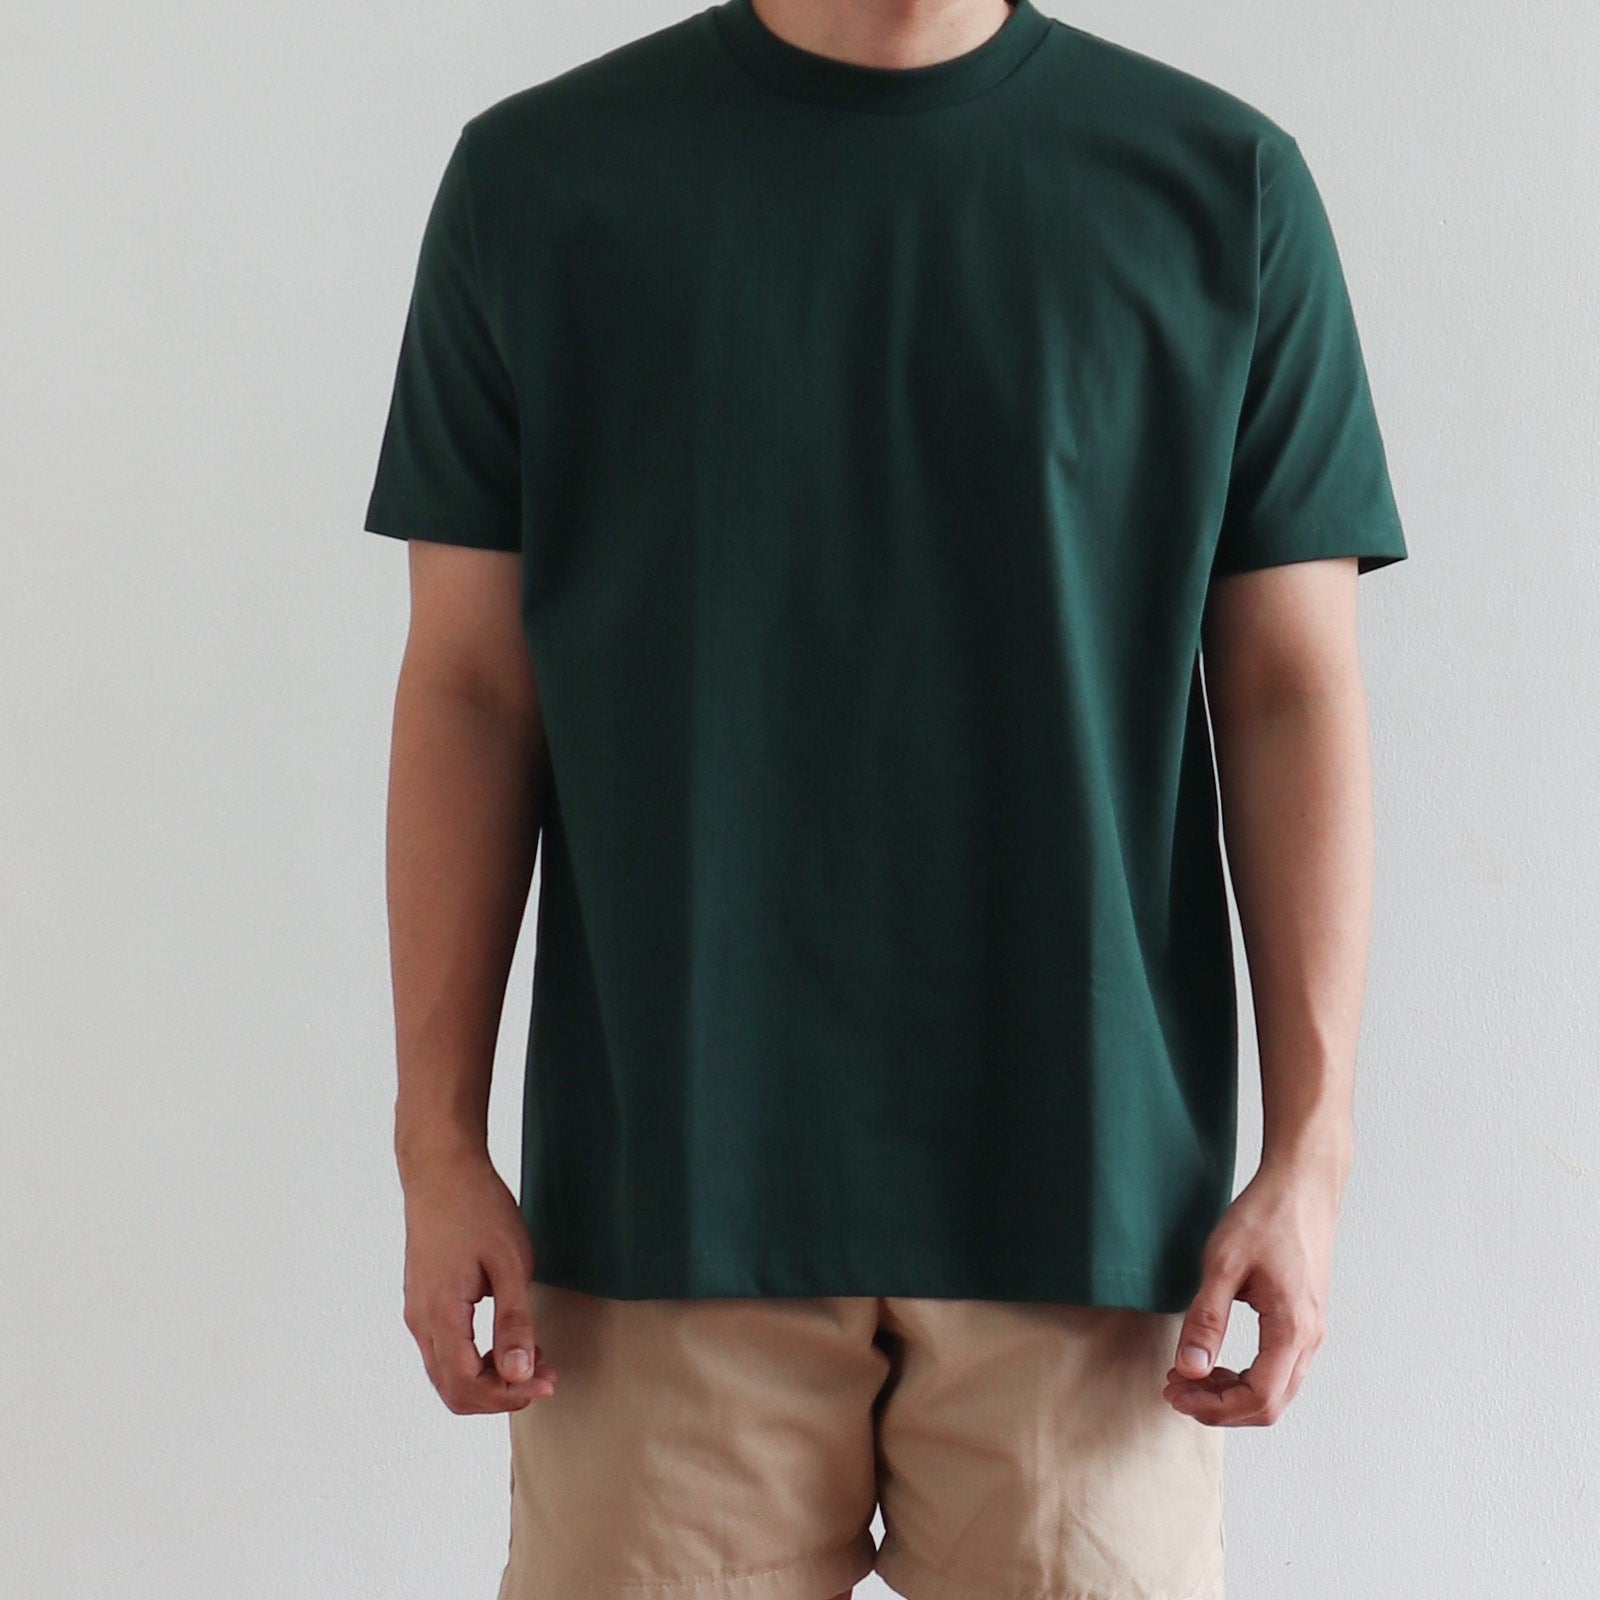 CLASSIC TEE IN FOREST GREEN